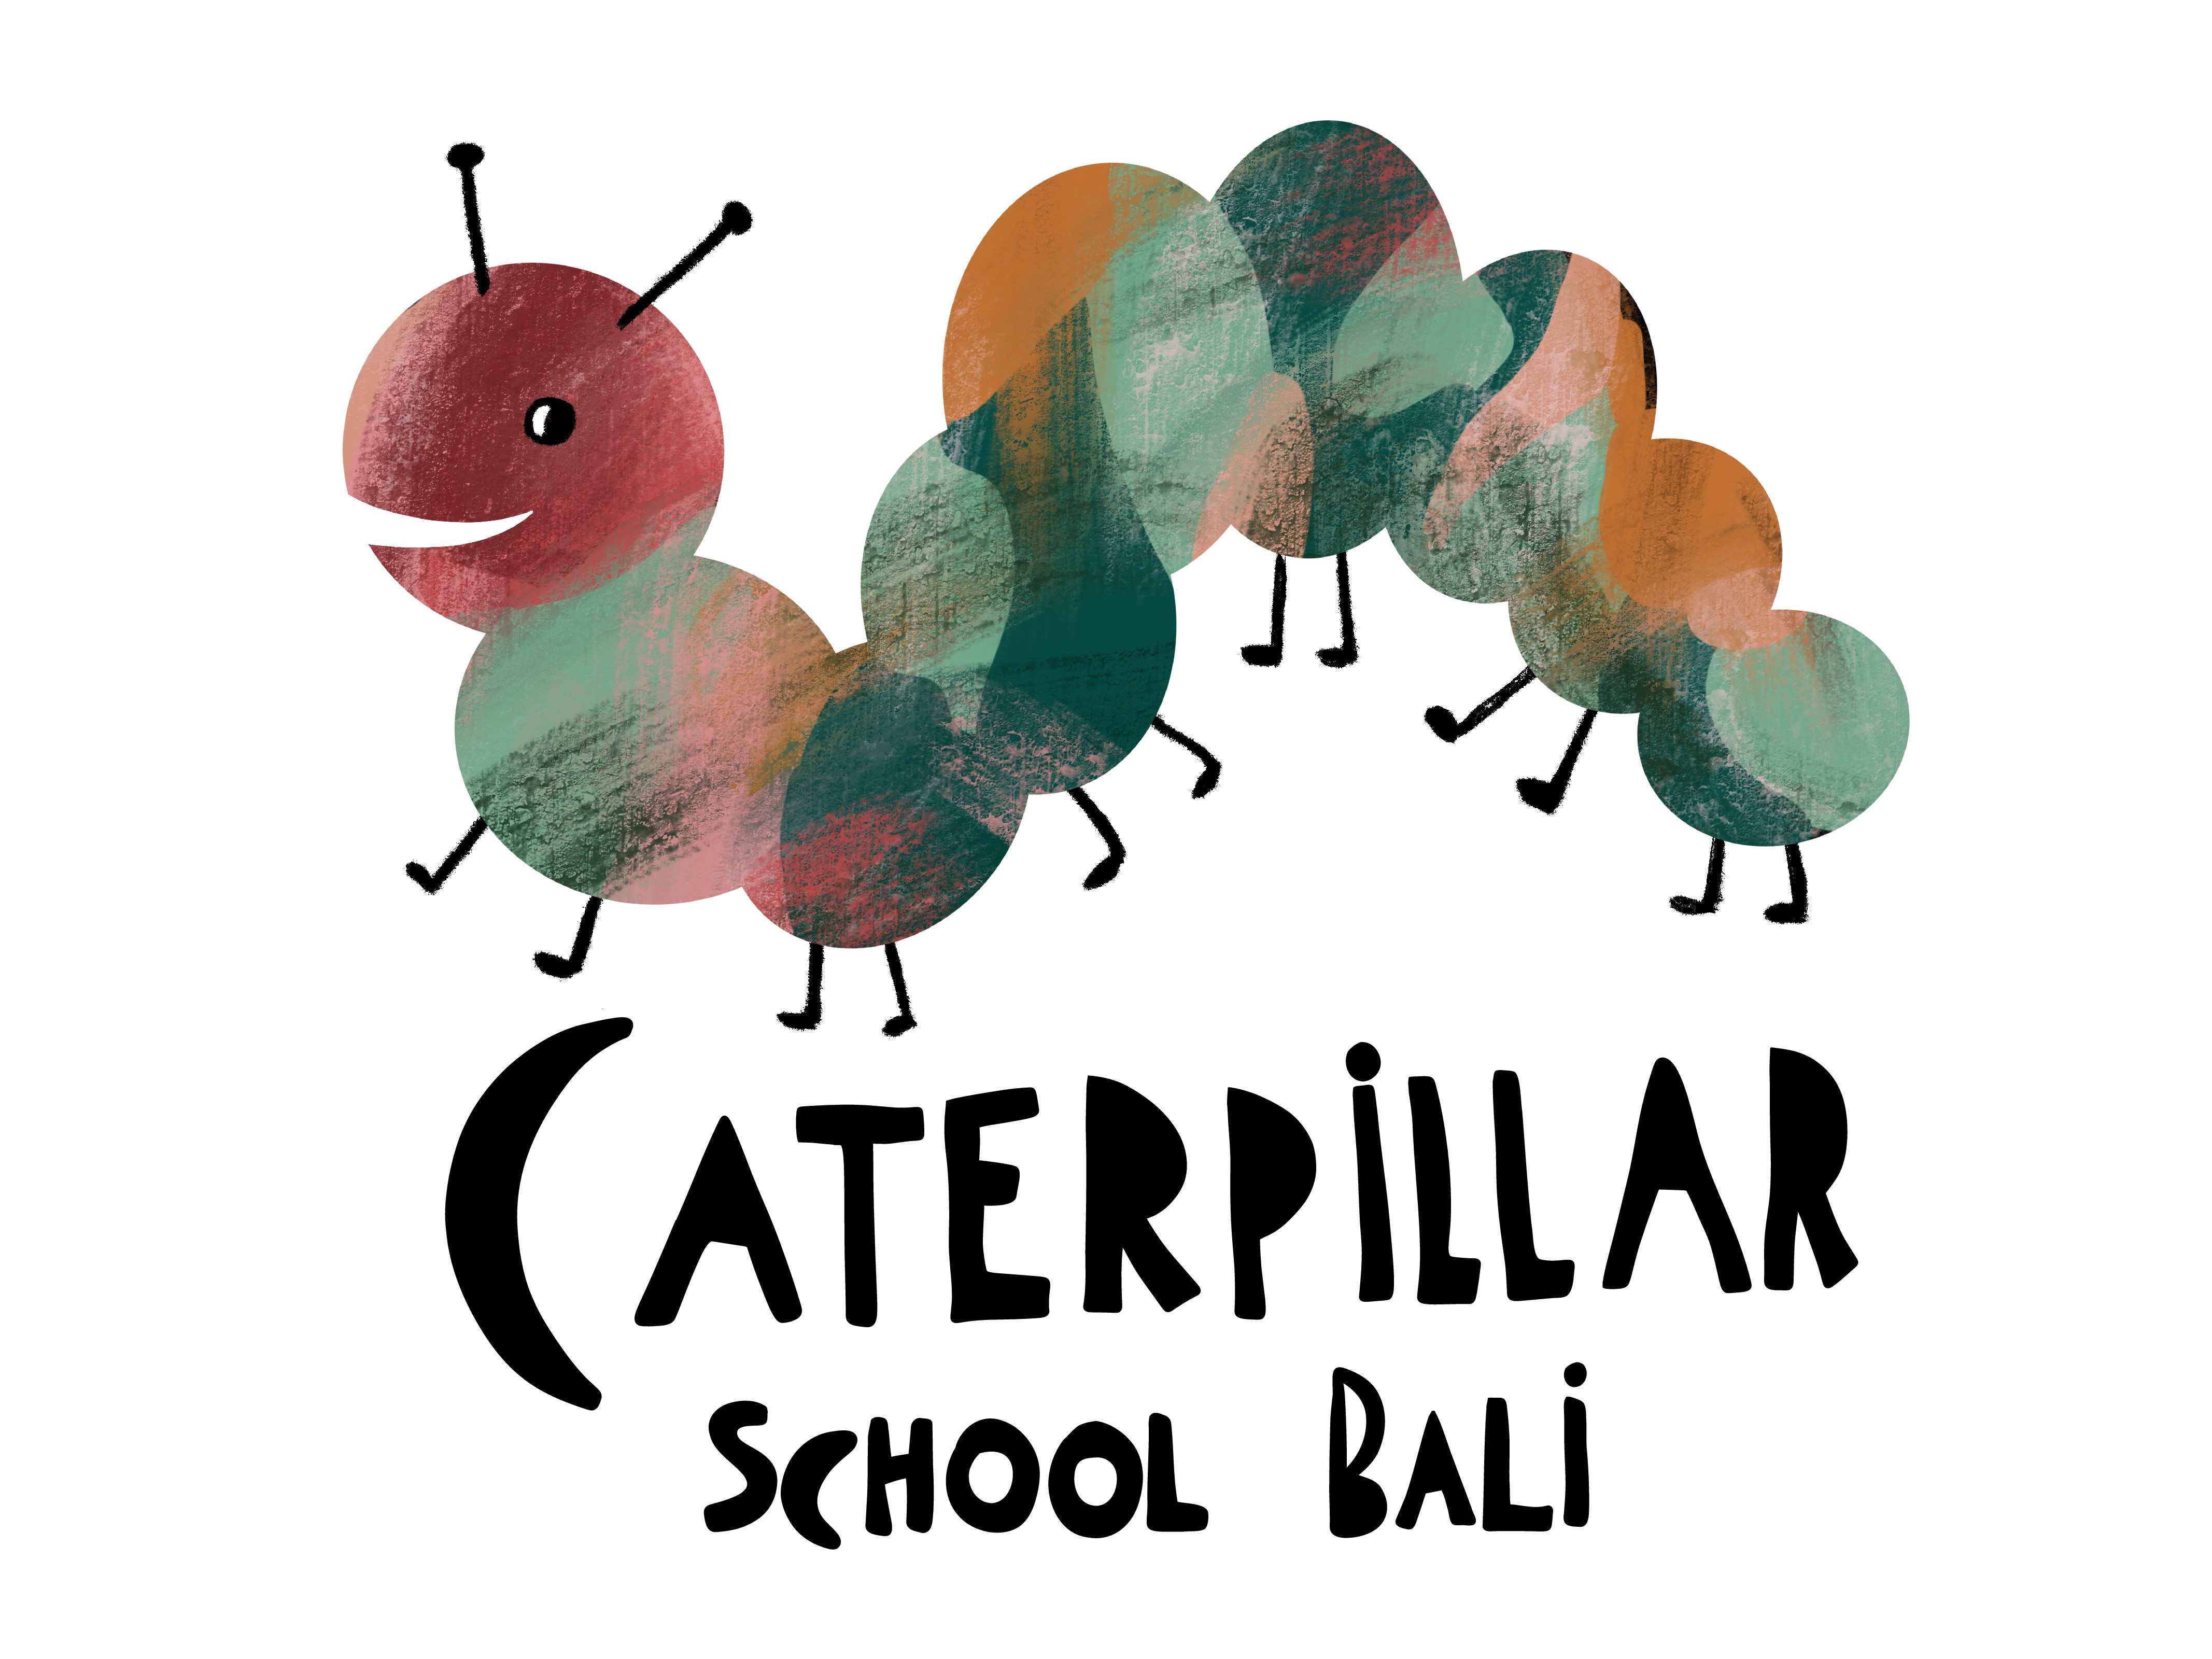 We need a nature and animal inspired, playful logo for our school / learning centre